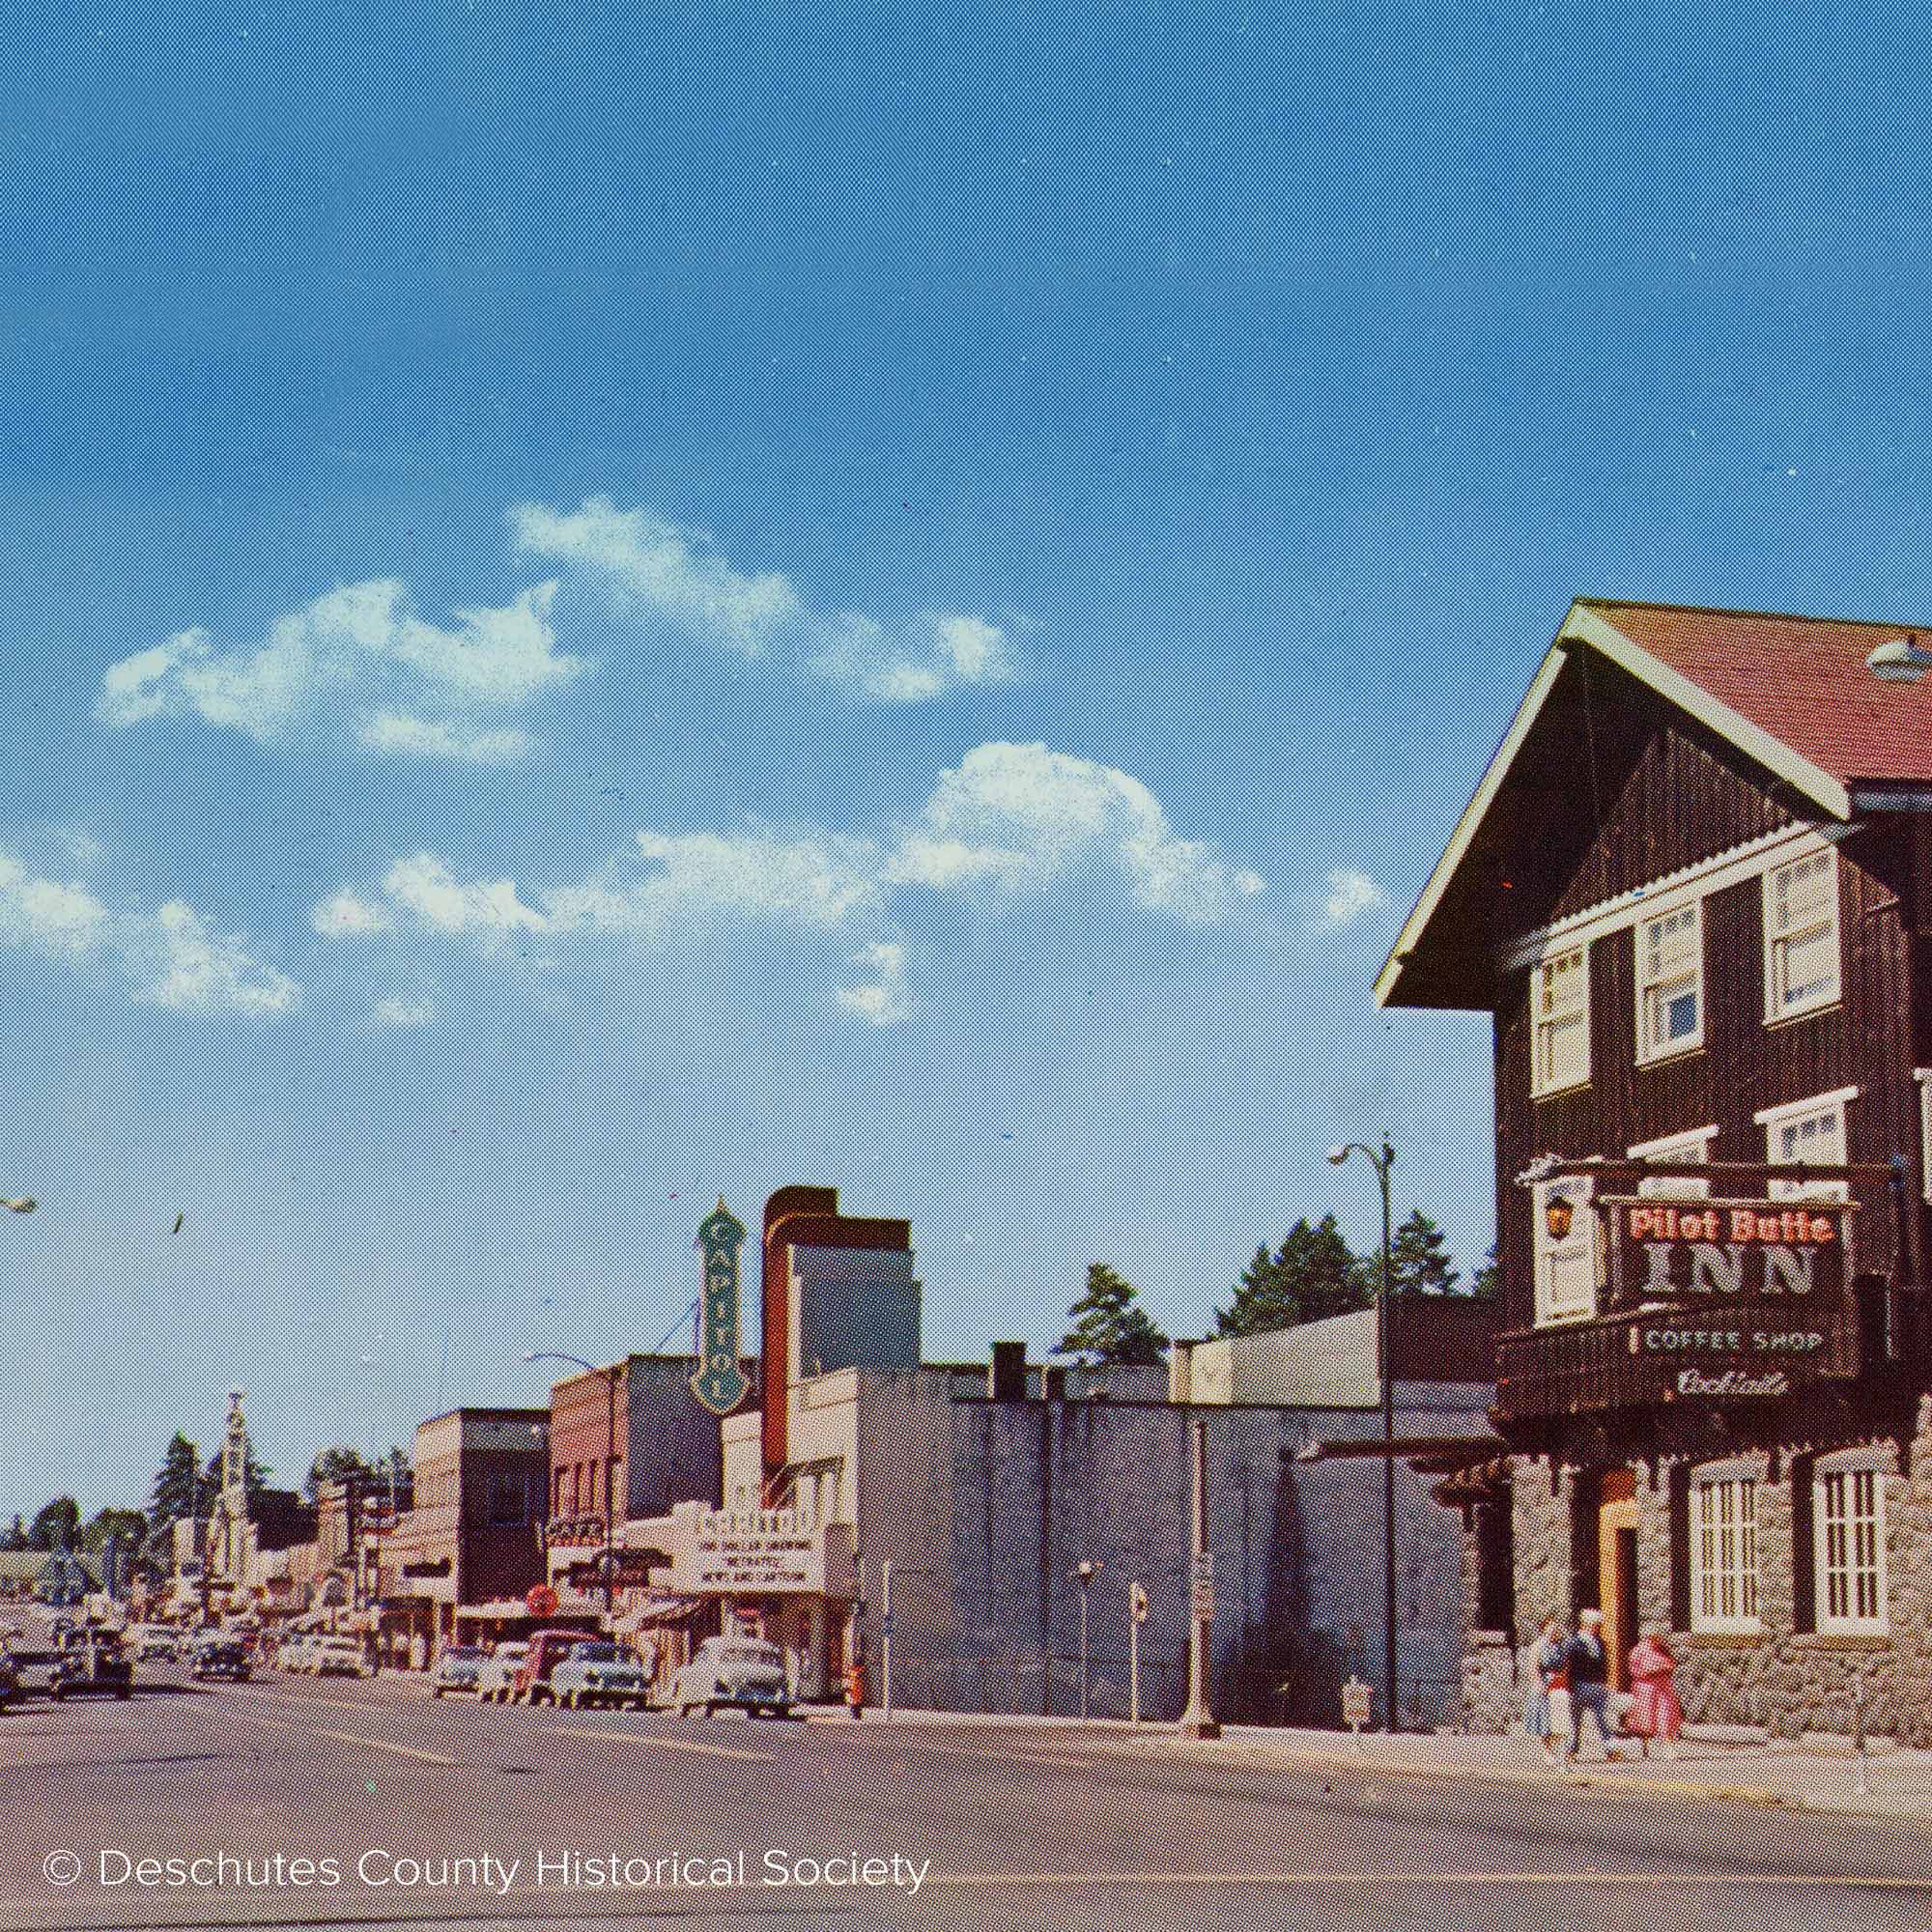 An image of downtown Bend, OR during the 1960s